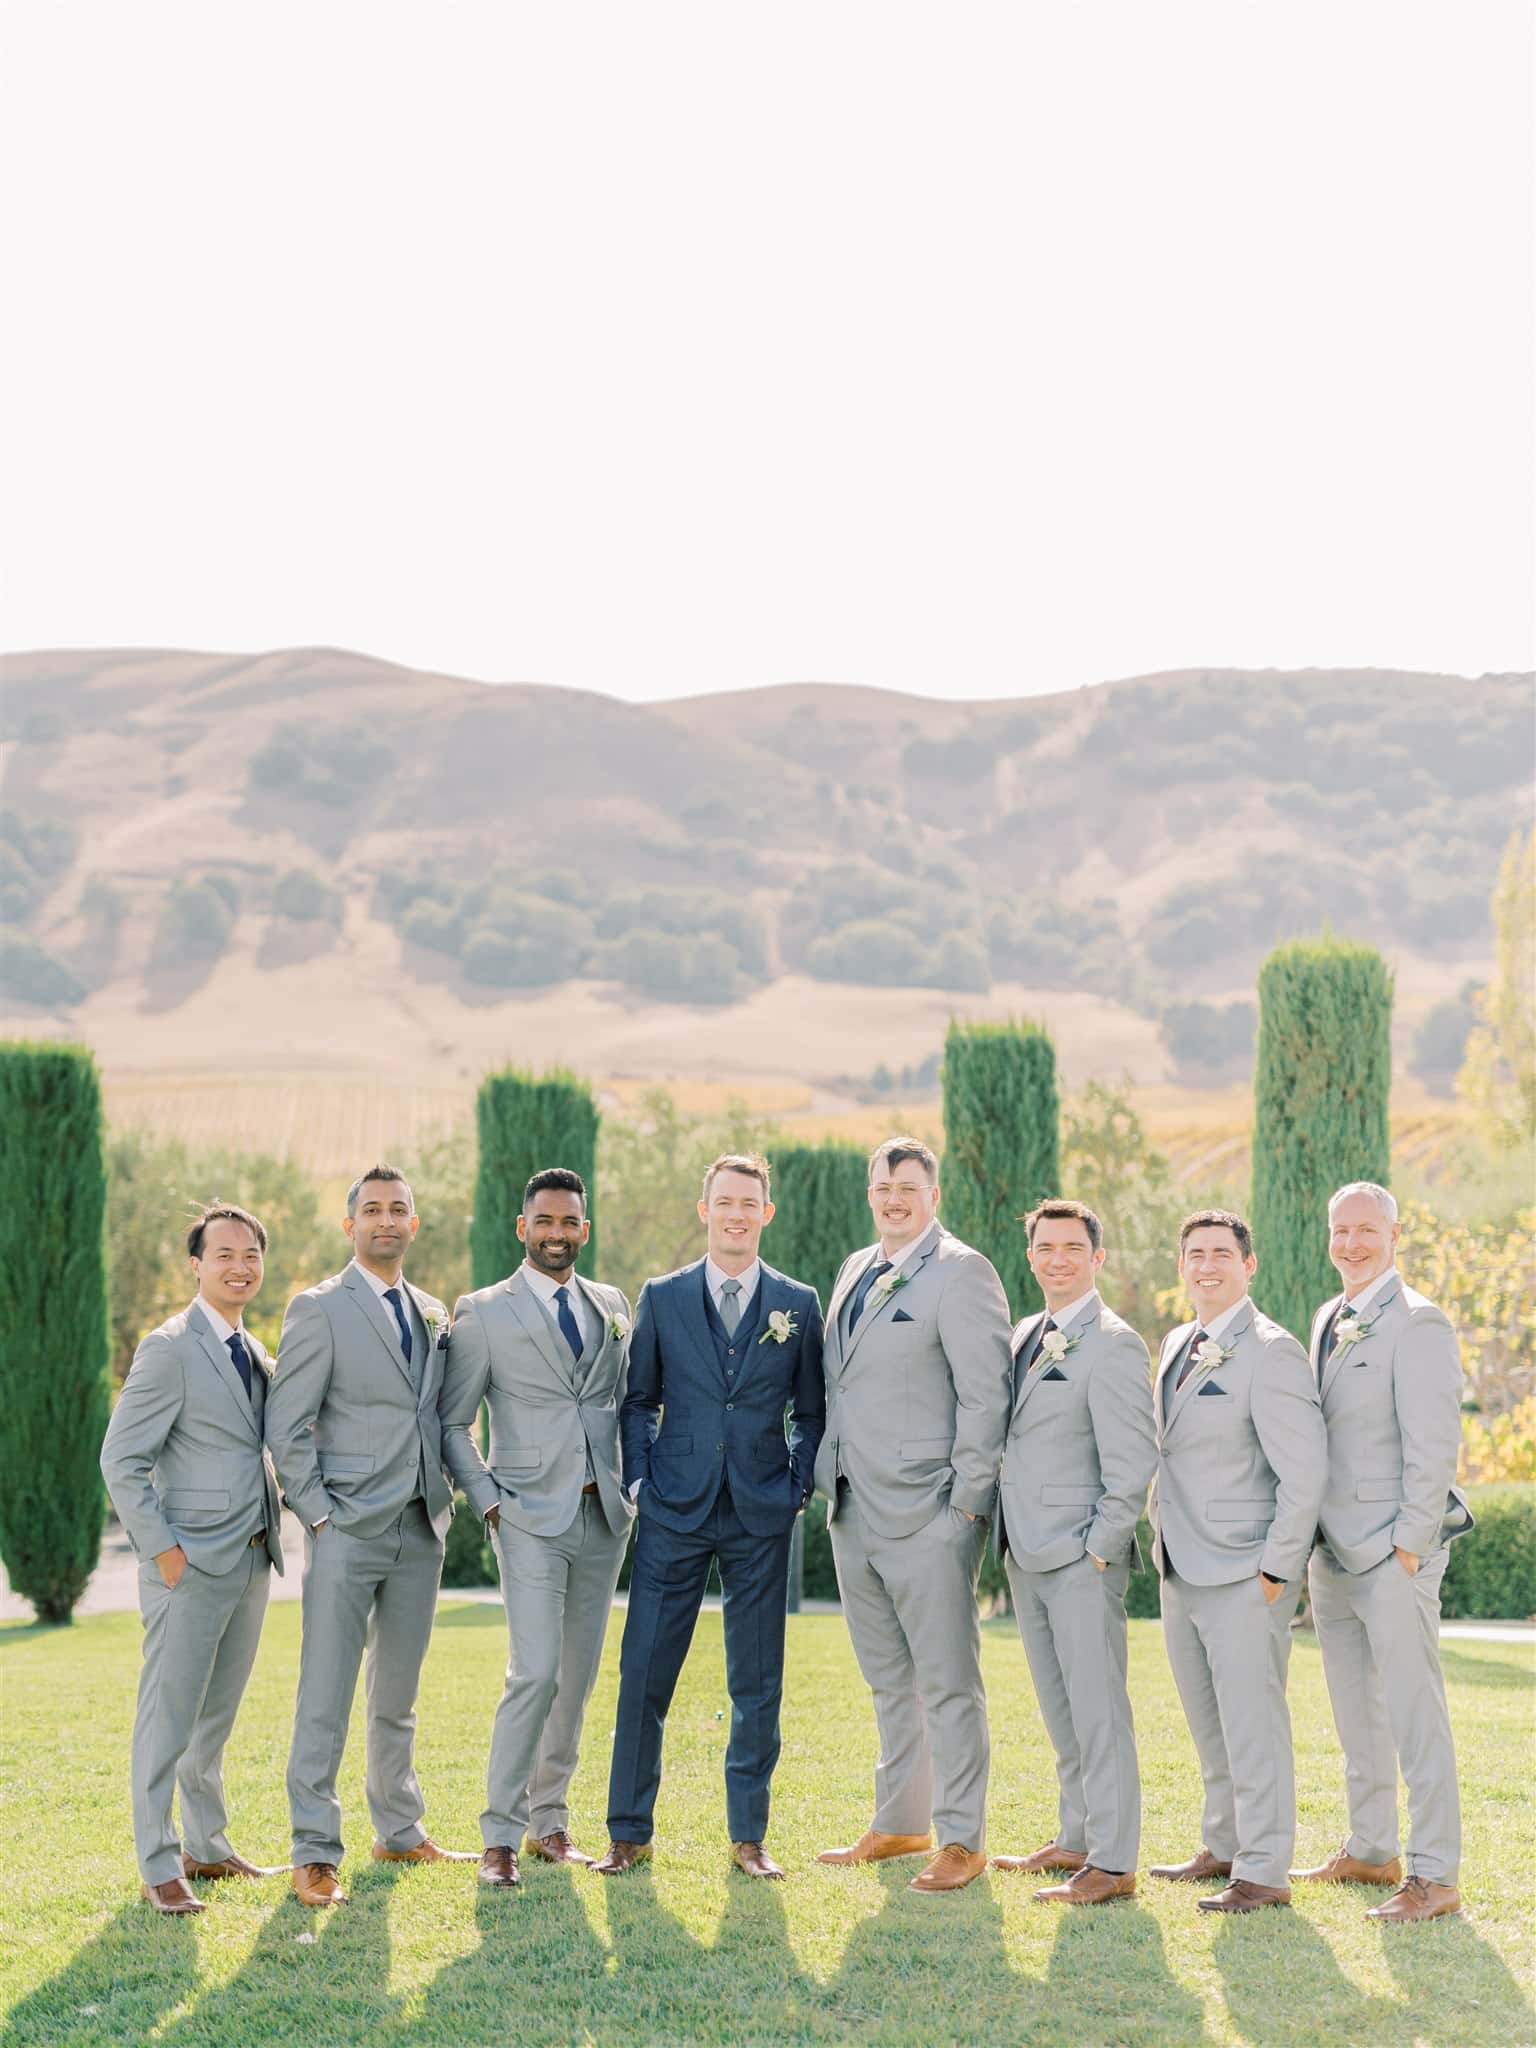 A wedding party poses for pictures with mountains in the background